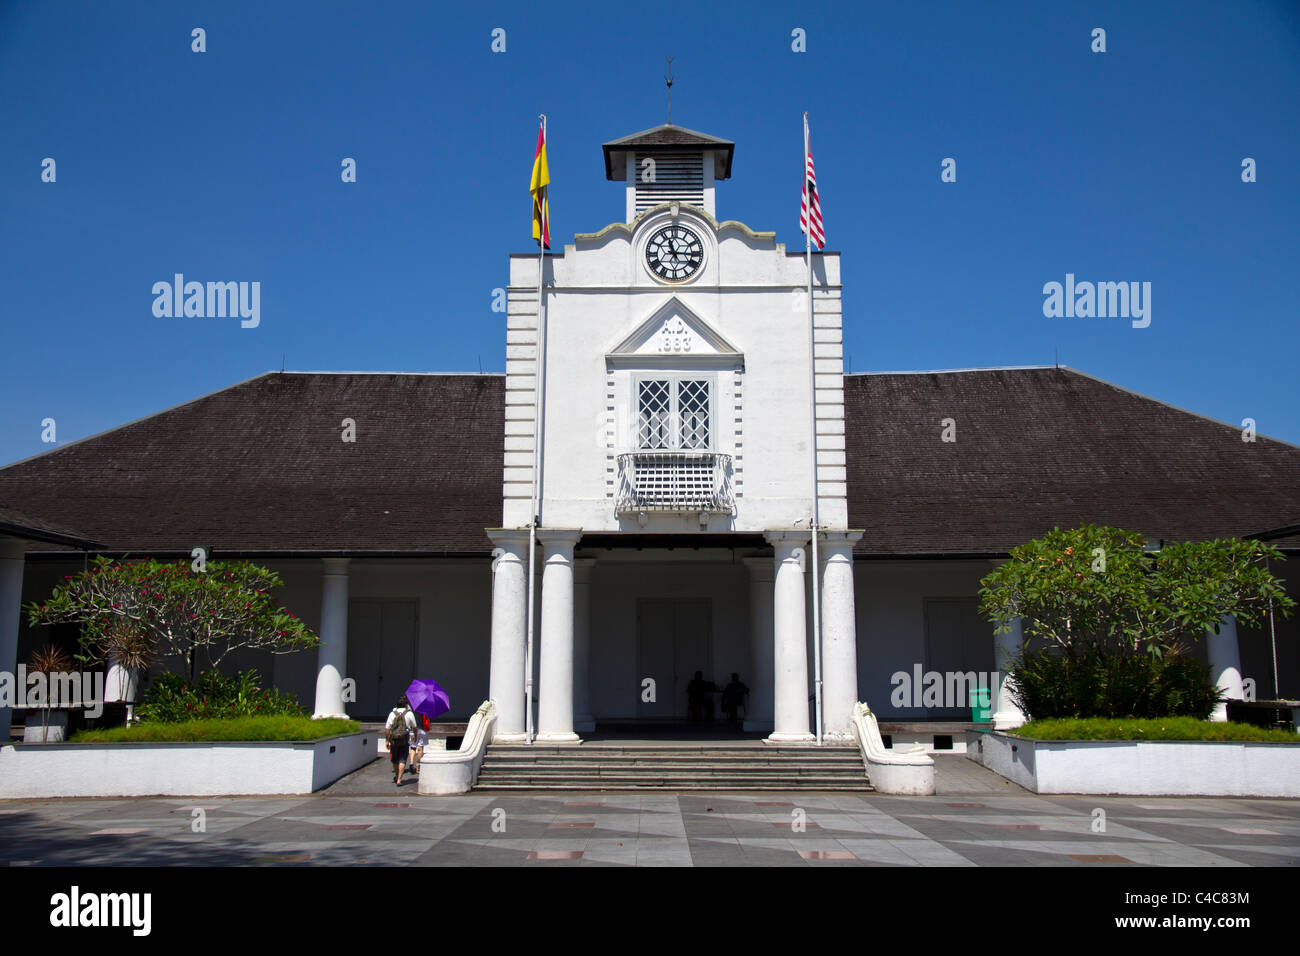 The Old Courthouse in Kuching, Borneo, Malaysia Stock Photo